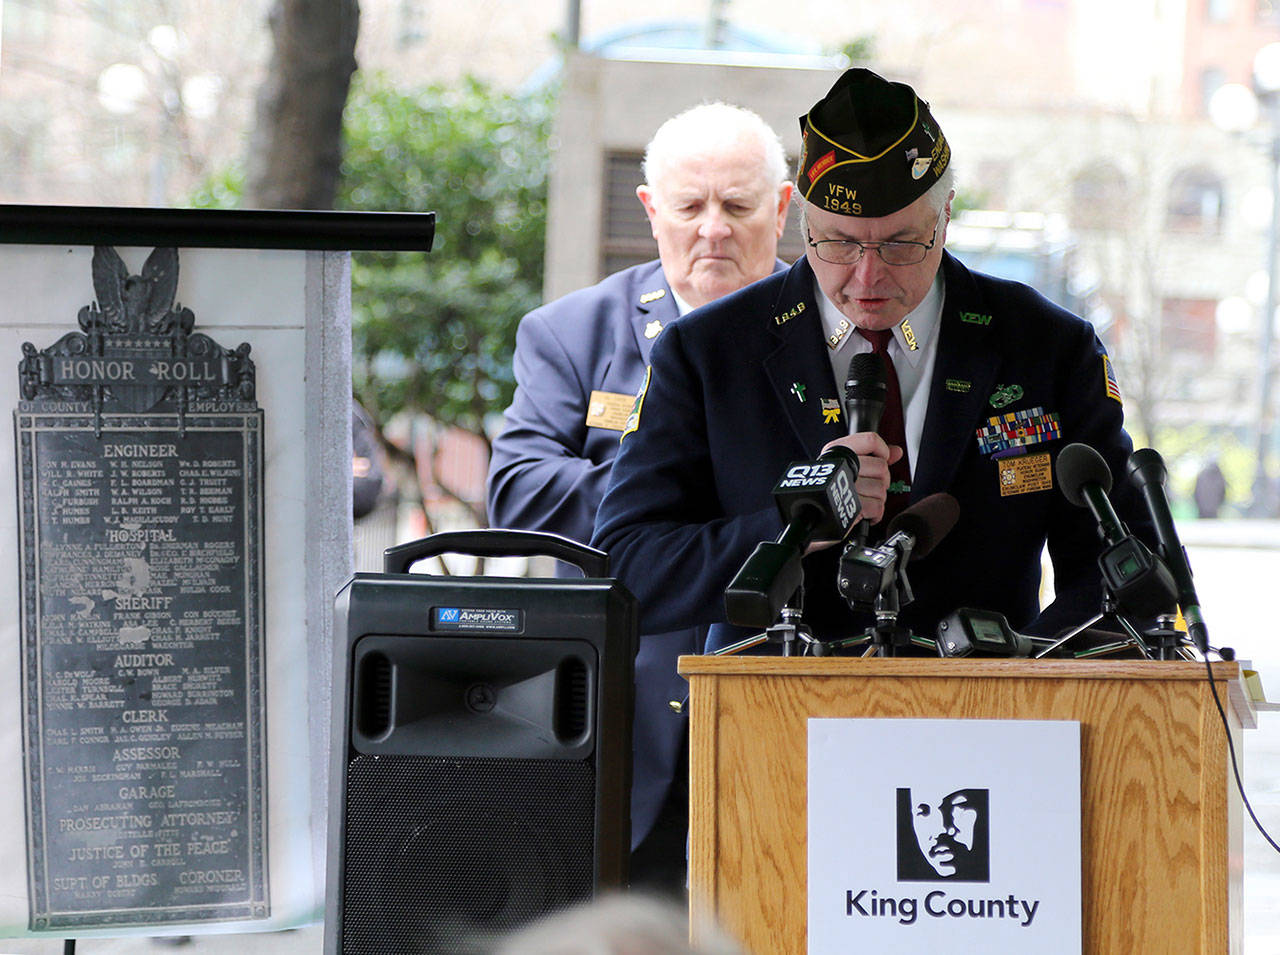 Tom Krueger leads a prayer during last week’s ceremony as Al Zarb looks on. Both are members of Enumclaw’s VFW Post 1949. Photo courtesy of King County.